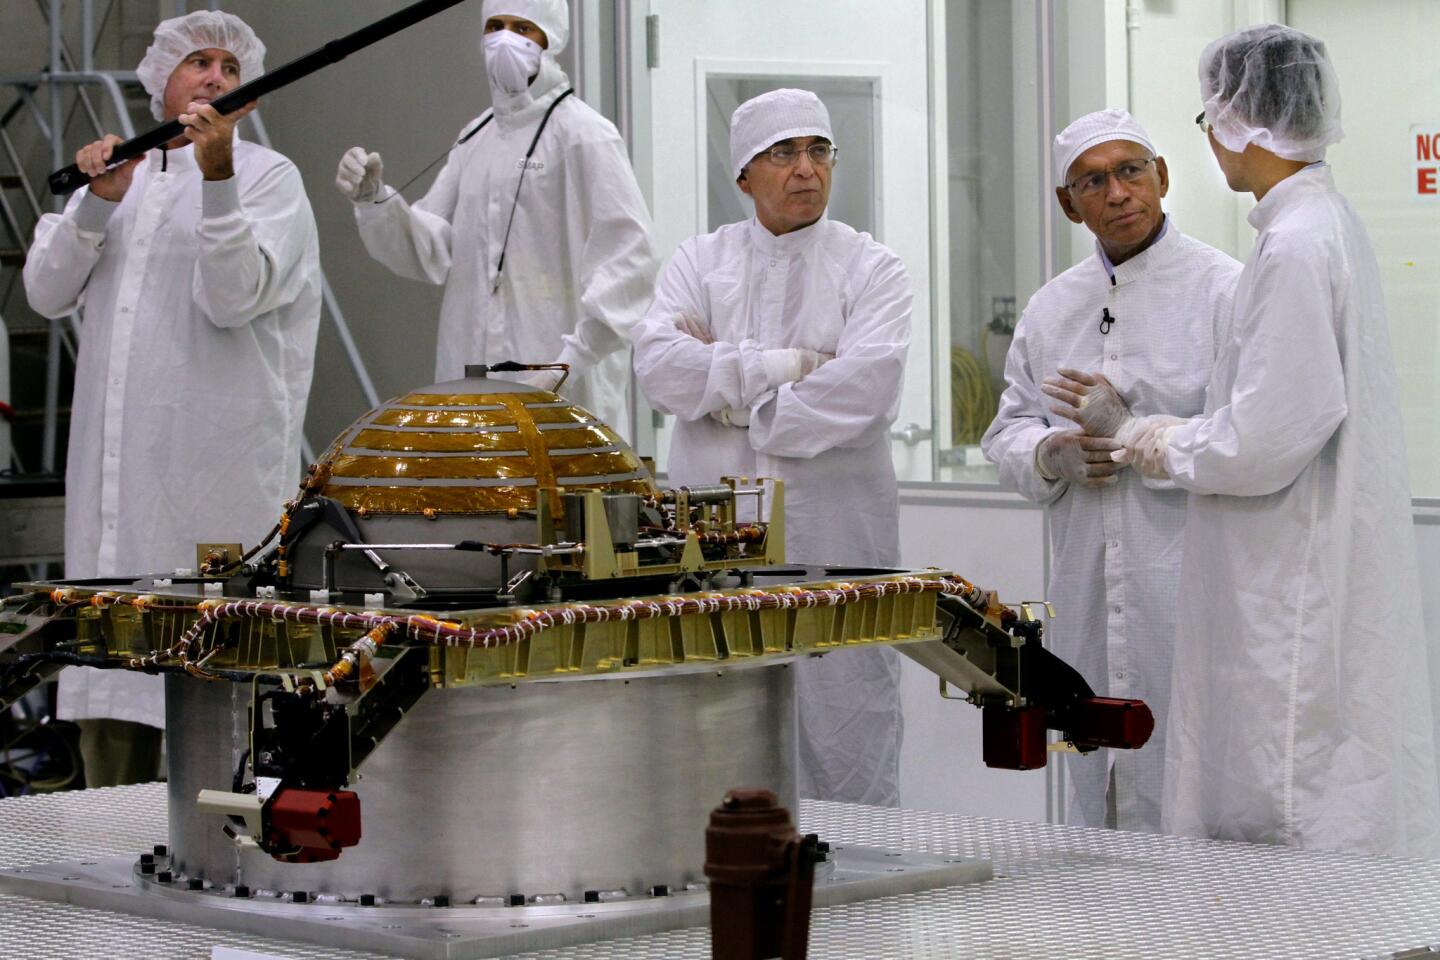 NASA Administrator Charles Bolden, second from right, speaks with SMAP spacecraft lead systems engineer Wayne Lee, right, during visit to the Spacecraft Assembly Facility Cleanroom at the Jet Propulsion Laboratory on Tuesday, August 13, 2013. The SMAP propulsion module is in front of them. The Soil Moisture Active Passive (SMAP) is a NASA Earth satellite mission that will map Earth's land-surface soil moisture.